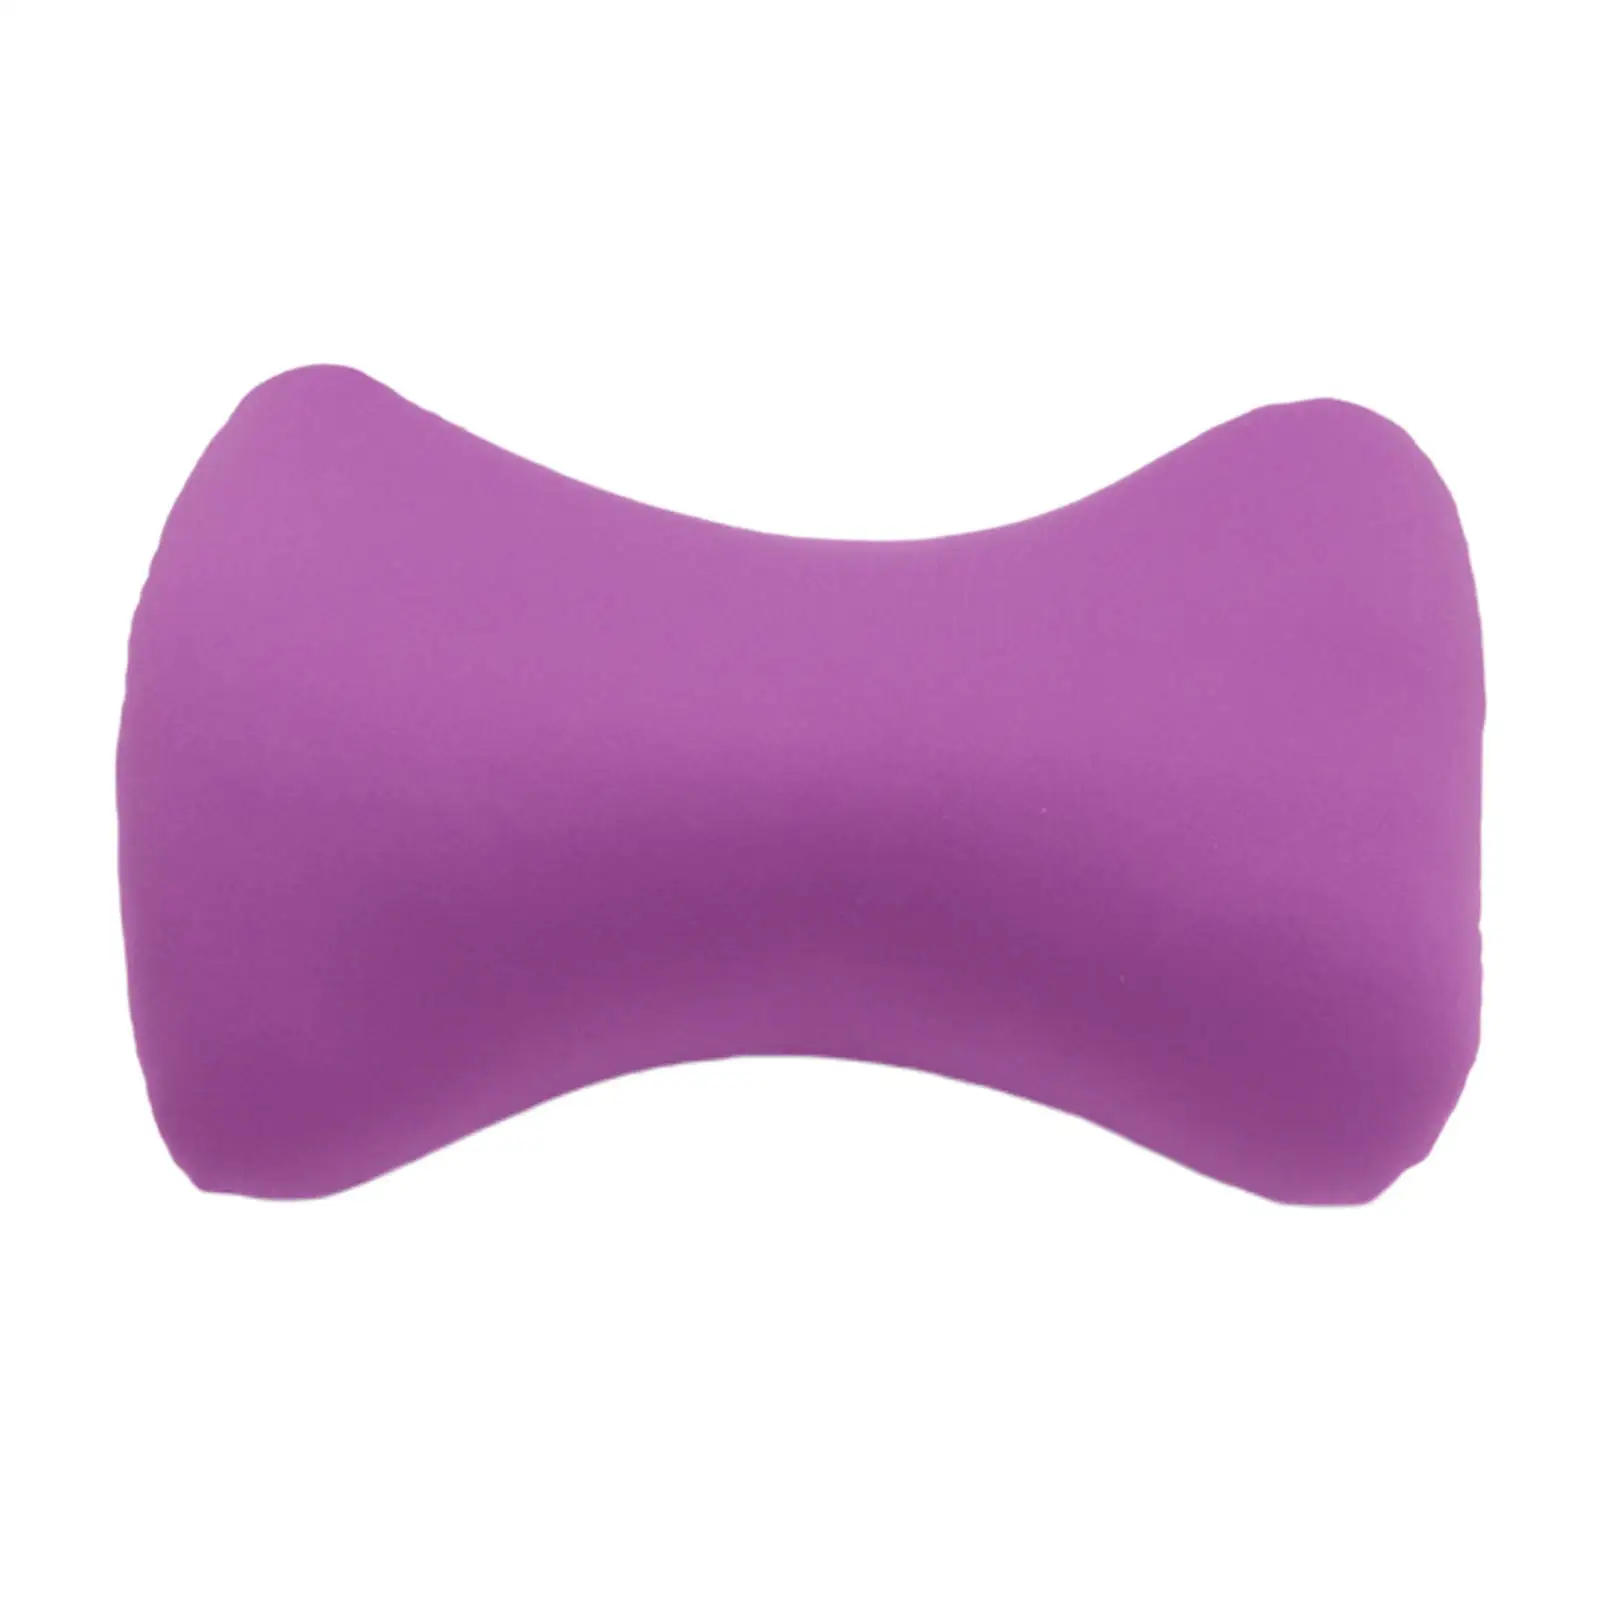 Mini Roll Pillow Home Seat Head Rest Neck Support Travel Microbead Cushion Pillow Core Square Pillow Interior Home Cushion